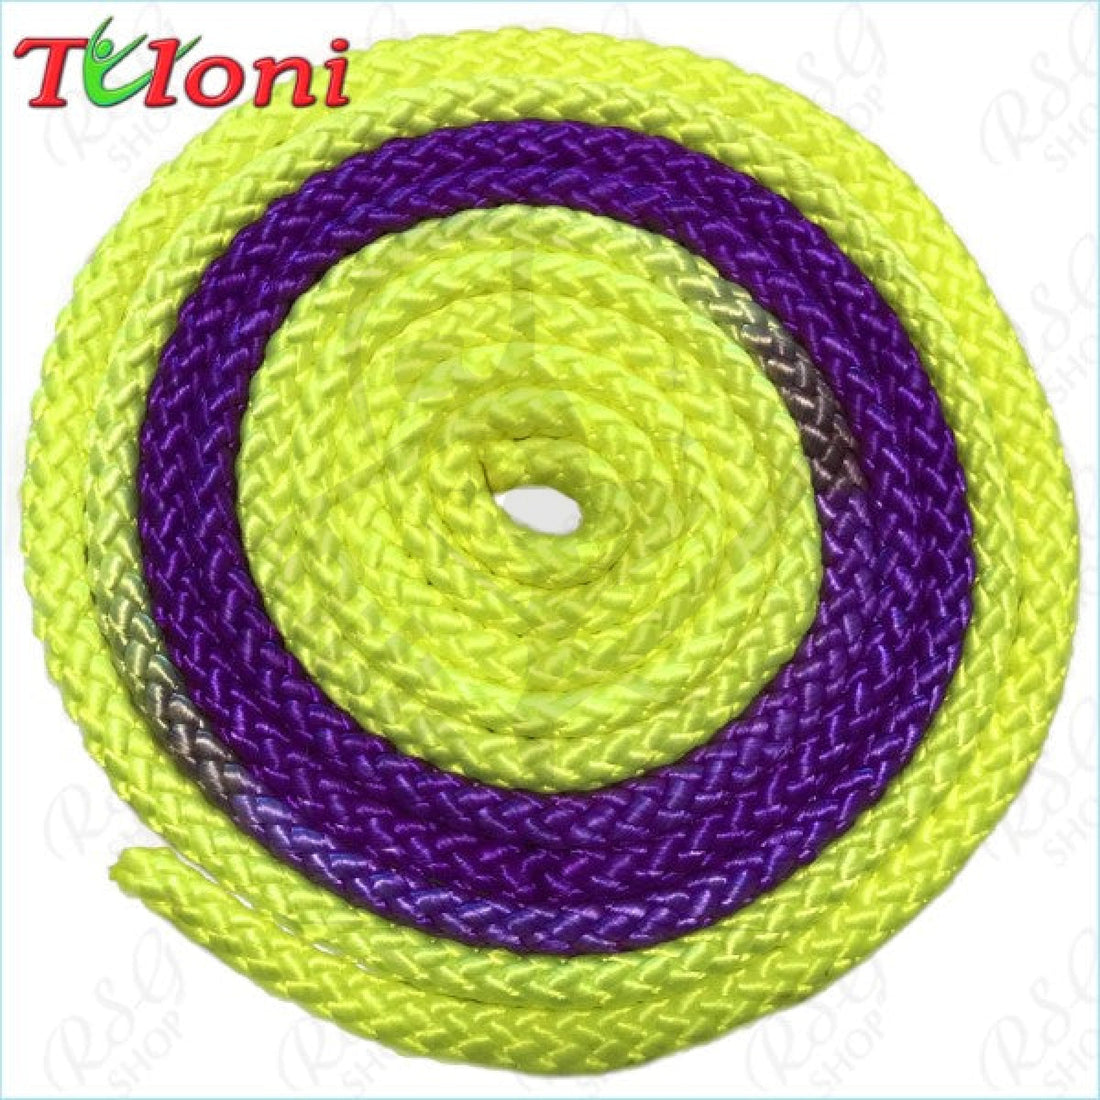 Tuloni Multicolour Rope 3M Yellow X Violet Ropes